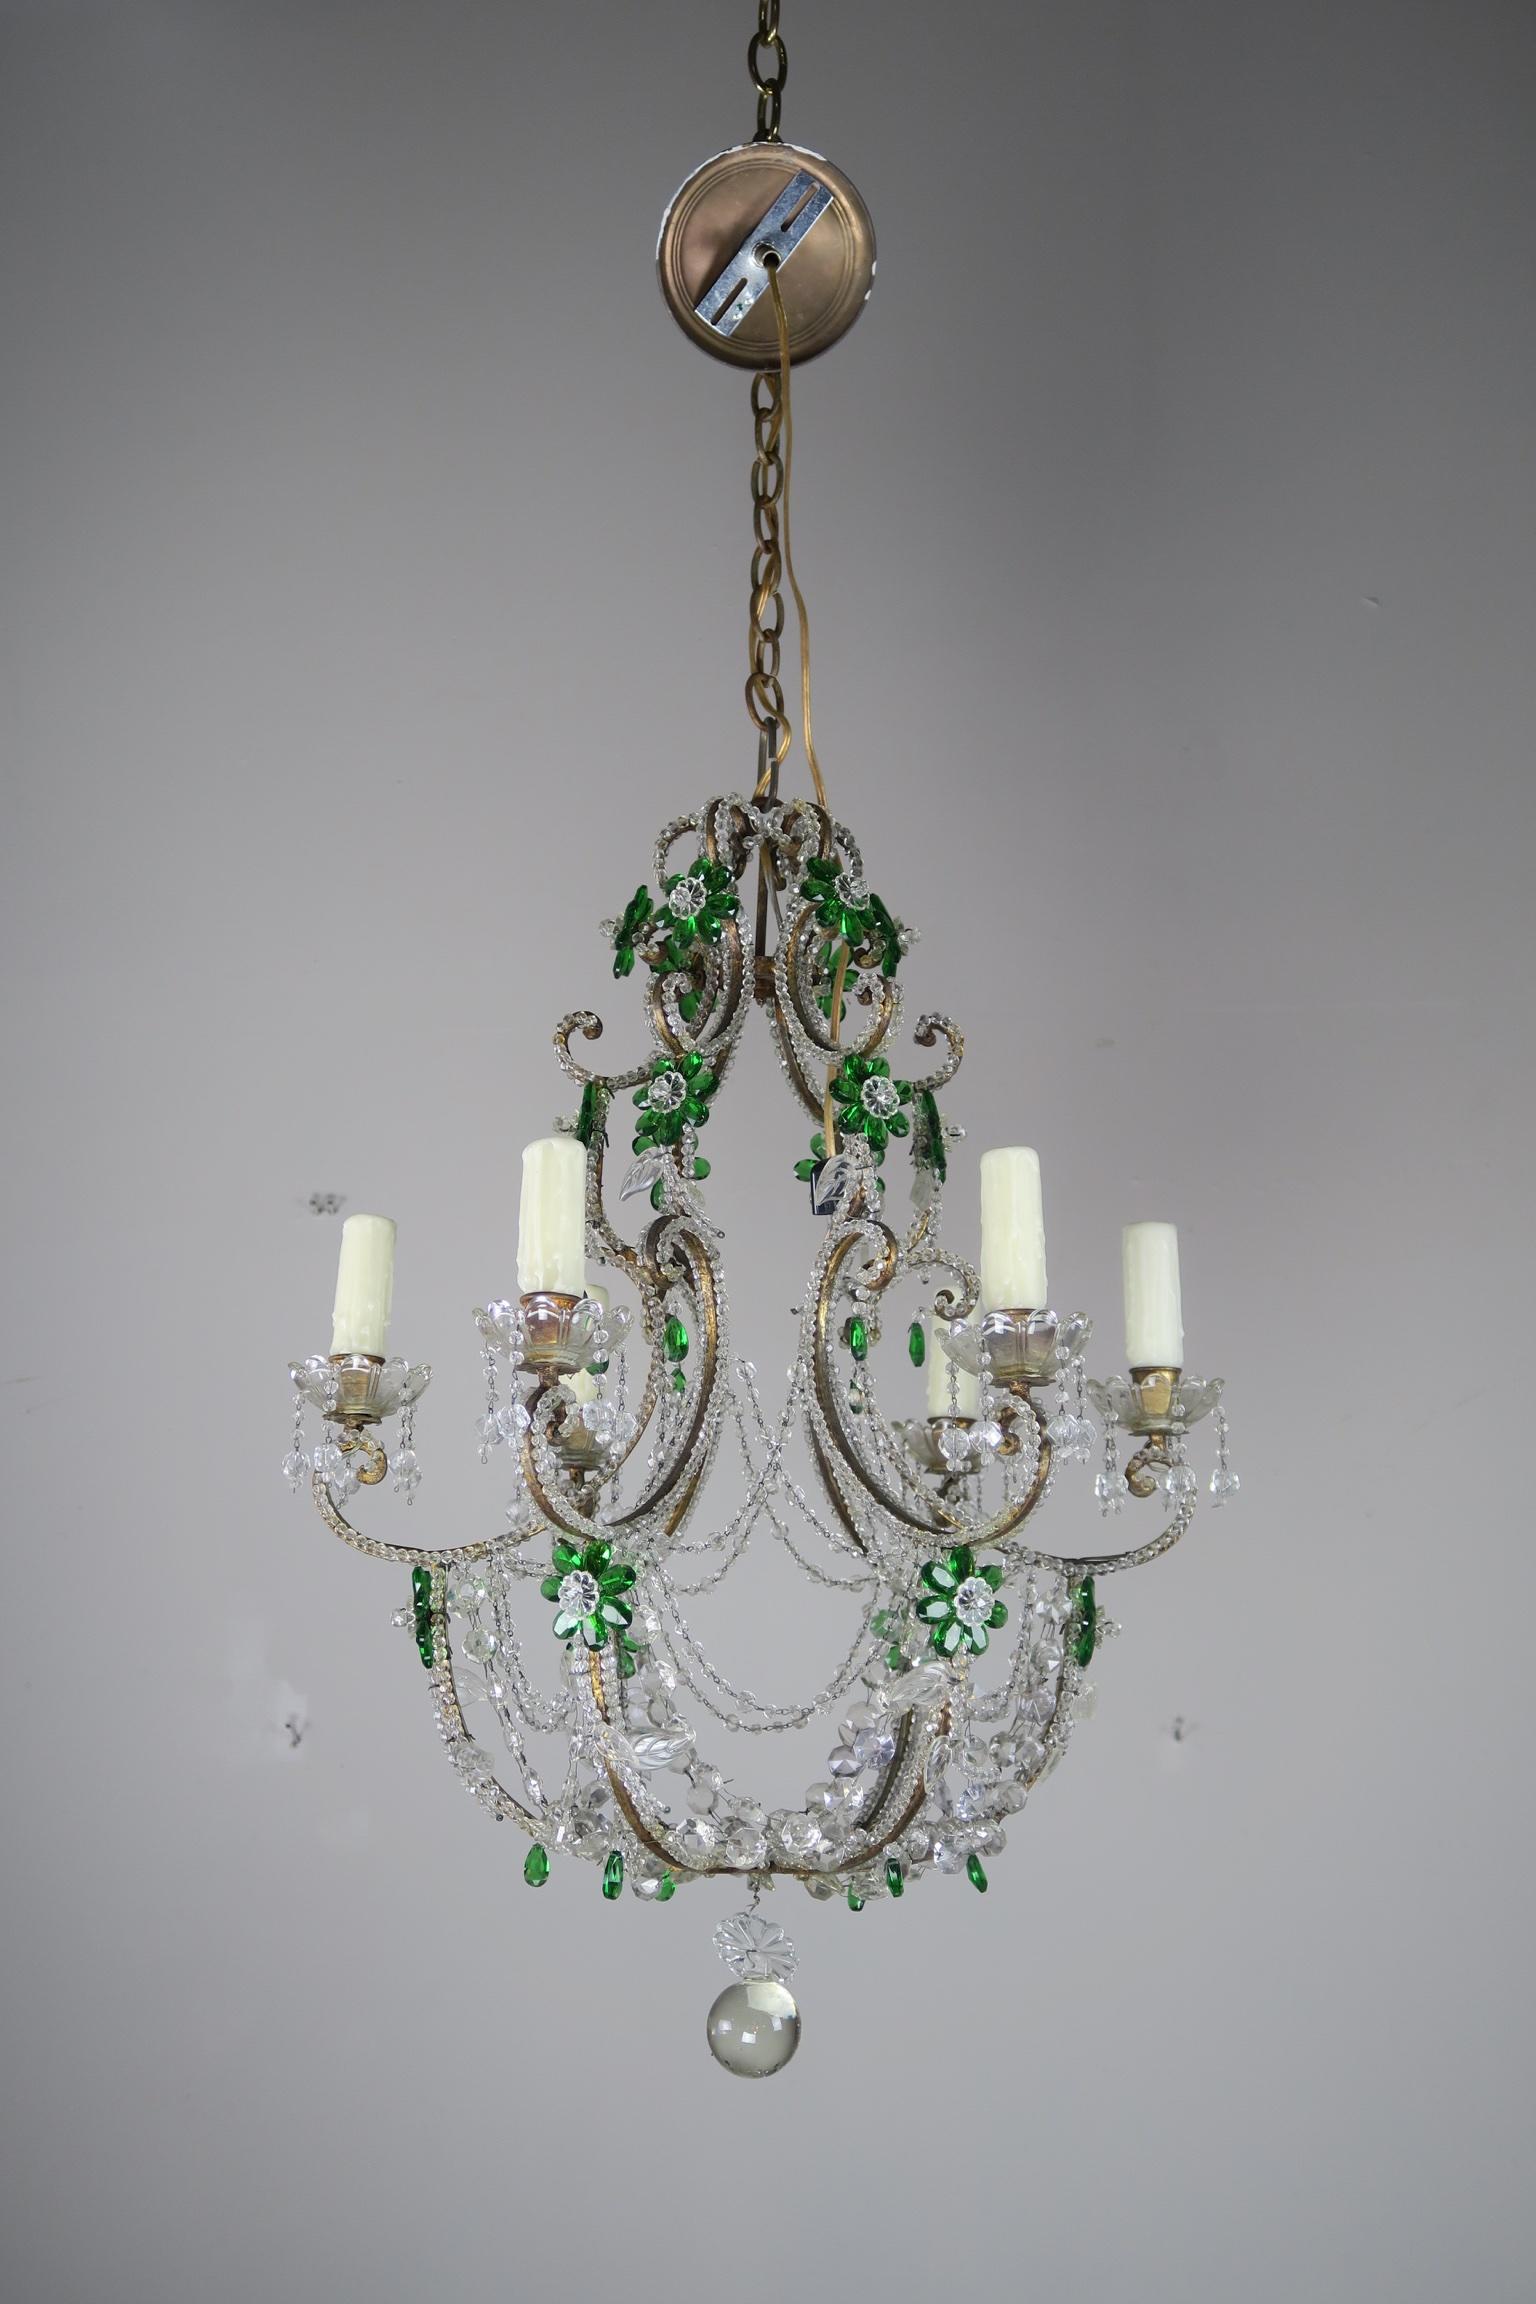 Italian six light Rococo style crystal beaded and gilt metal chandelier with emerald green crystal flowers throughout. The fixture is newly rewired with drip wax candle covers, new chain and canopy included.